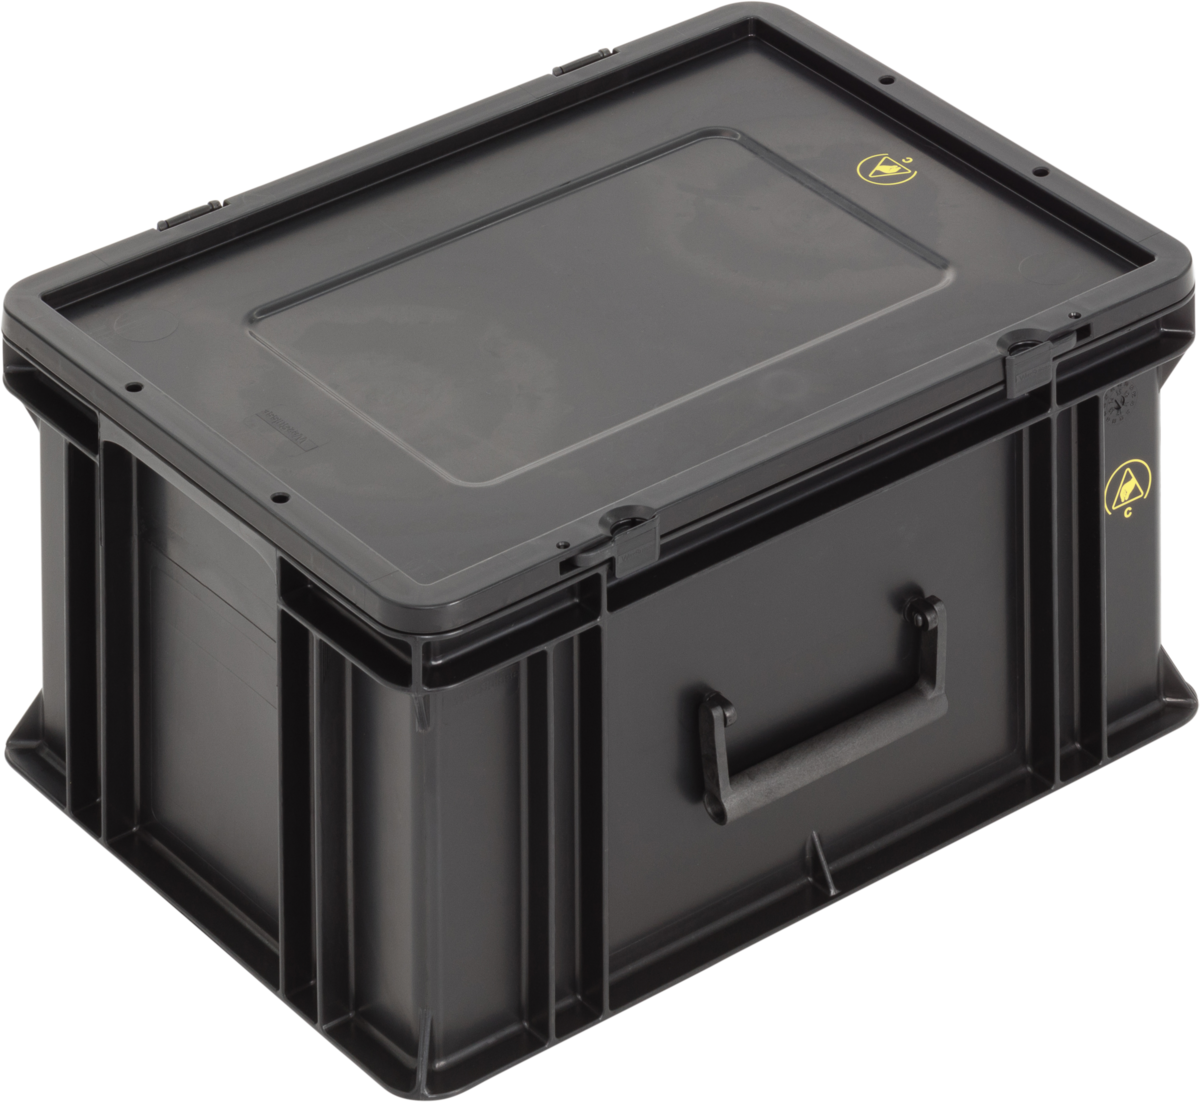 Anti-Static-ESD-Antistatic-Safe-SGL-Norm-Carrying-Cases-Flat-Base-007-Ref.-4320.397.992_1004398_400x300x221_01